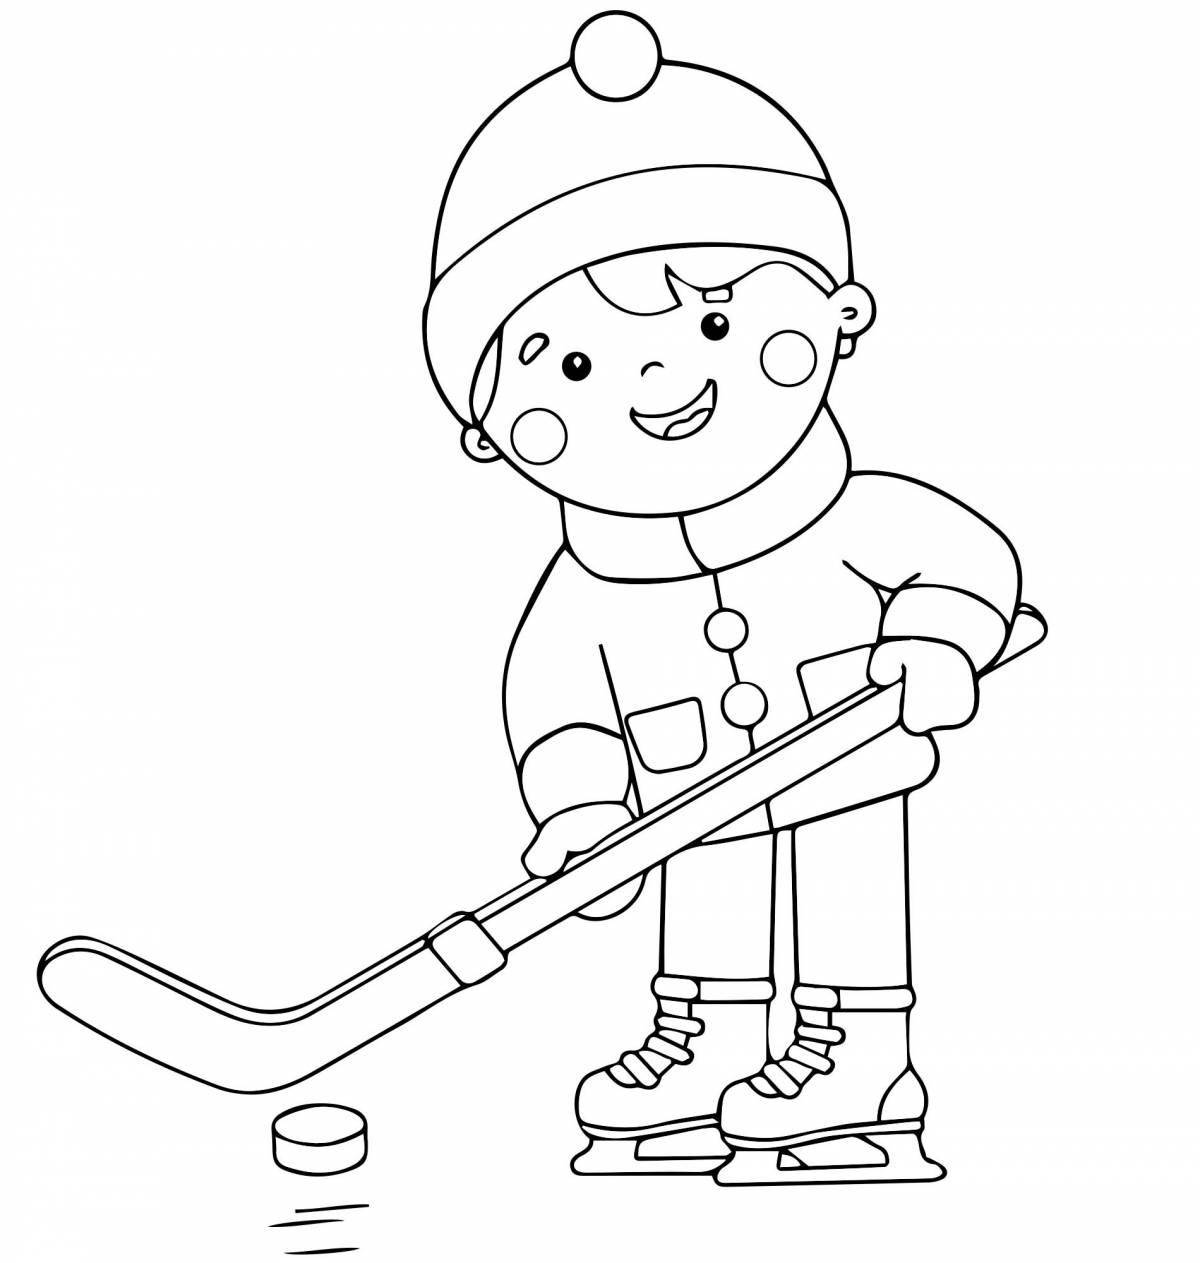 Luxury winter sports coloring page